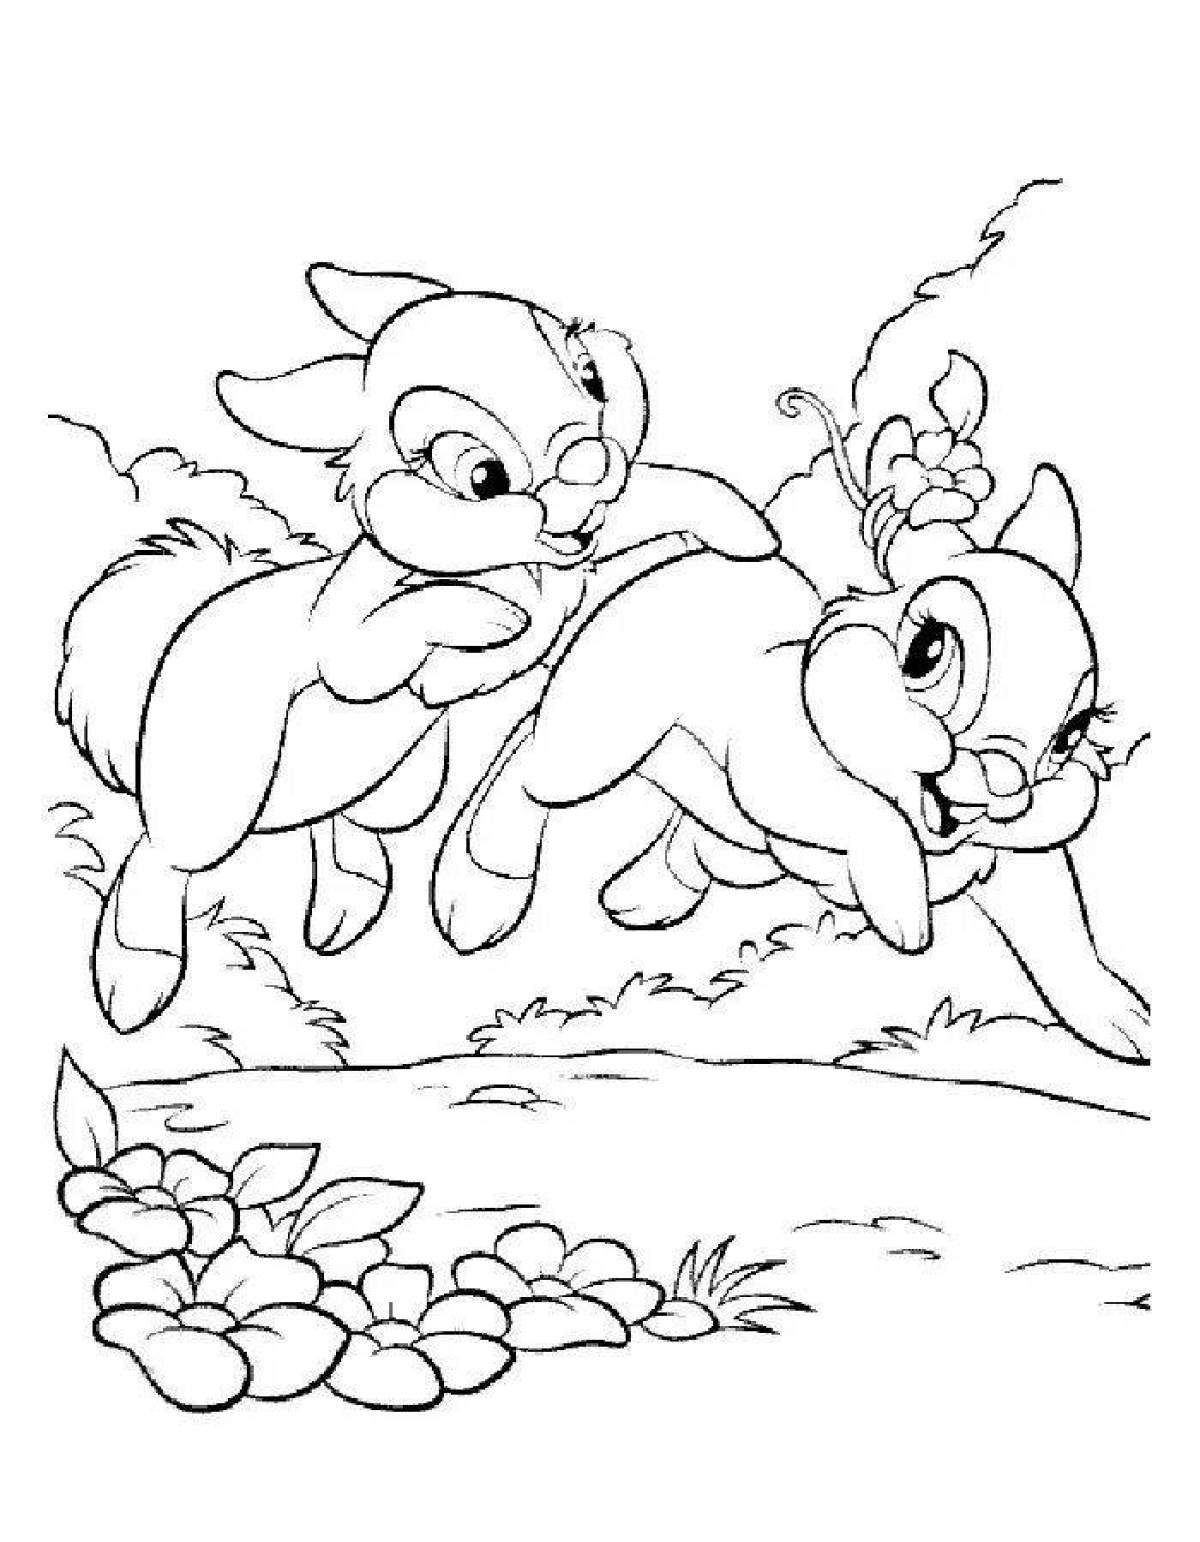 Coloring book bright cat and hare